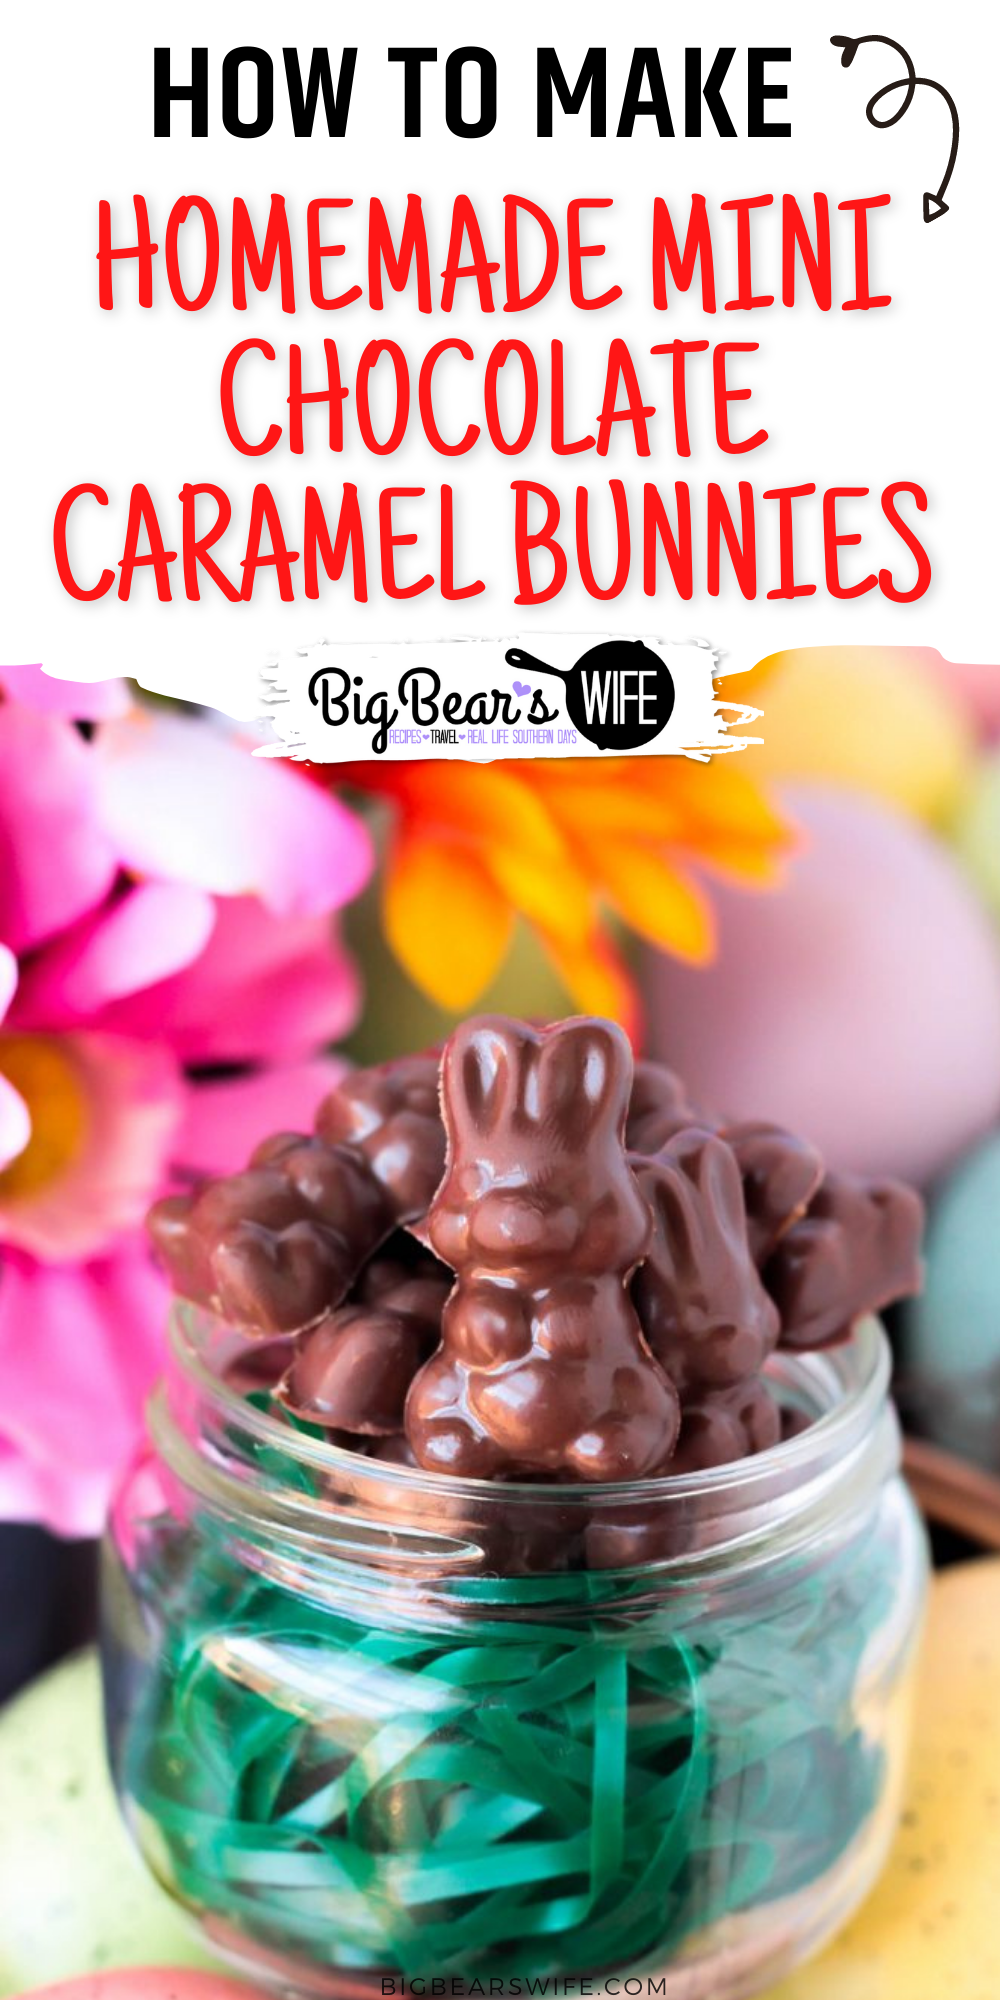 These Homemade Mini Chocolate Caramel Bunnies are really easy to make and they’re perfect for to top brownies, cakes and eclair desserts! They’re also the perfect Easter/Springtime ice cream toppers!

 via @bigbearswife